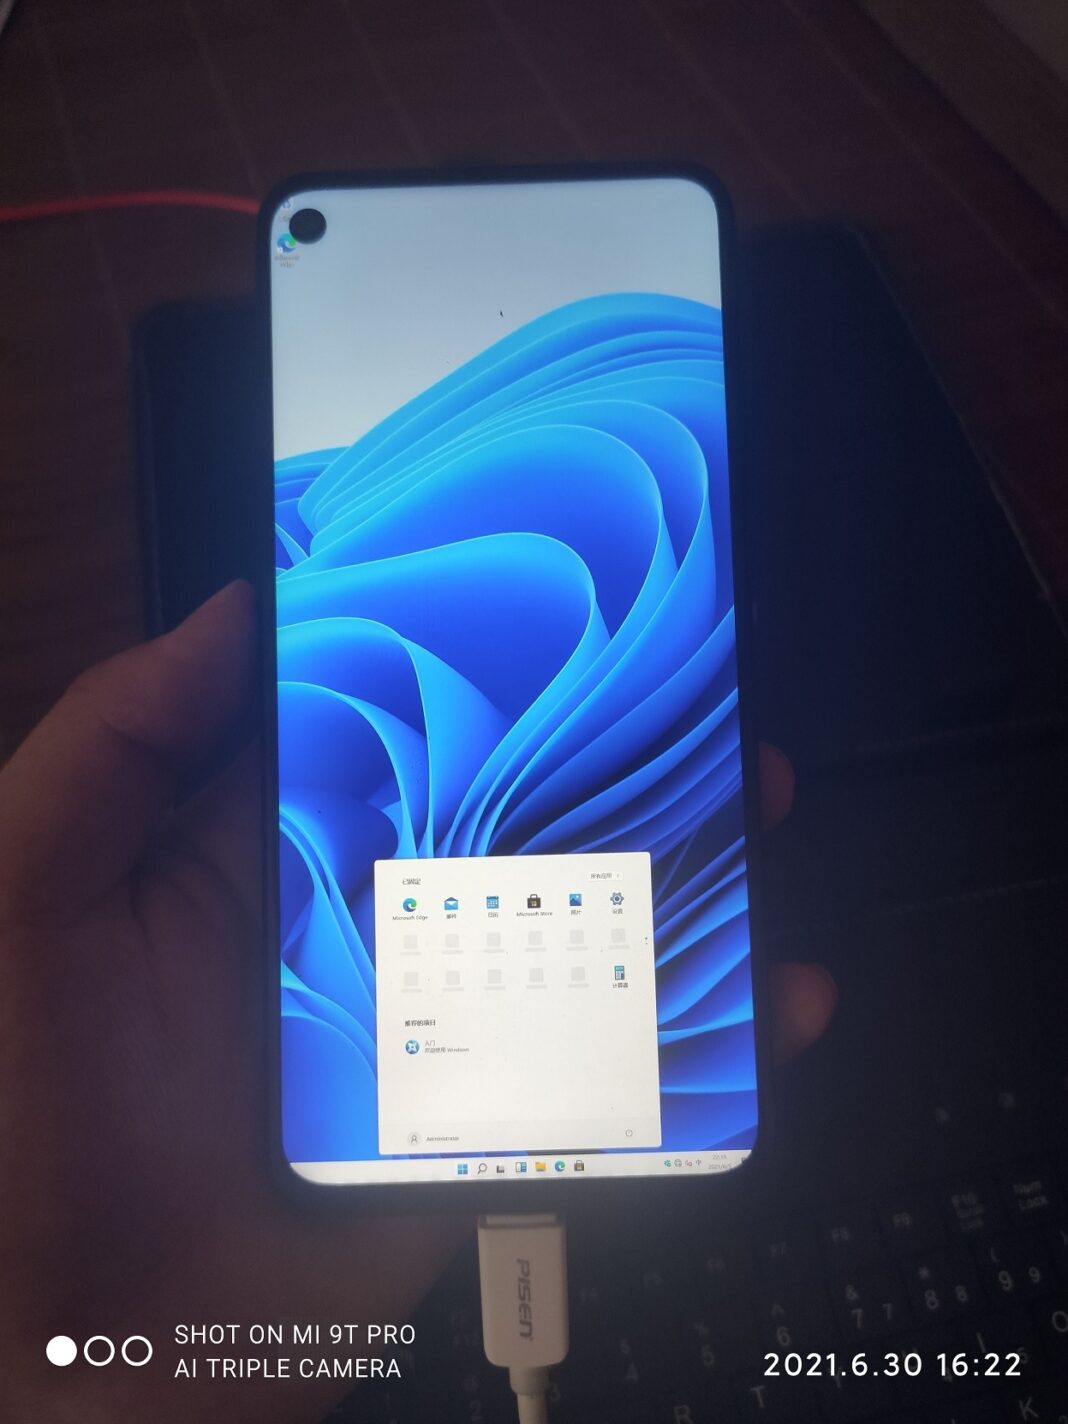 Hackers get Windows 11 running on the OnePlus 6T and Xiaomi Mi 8